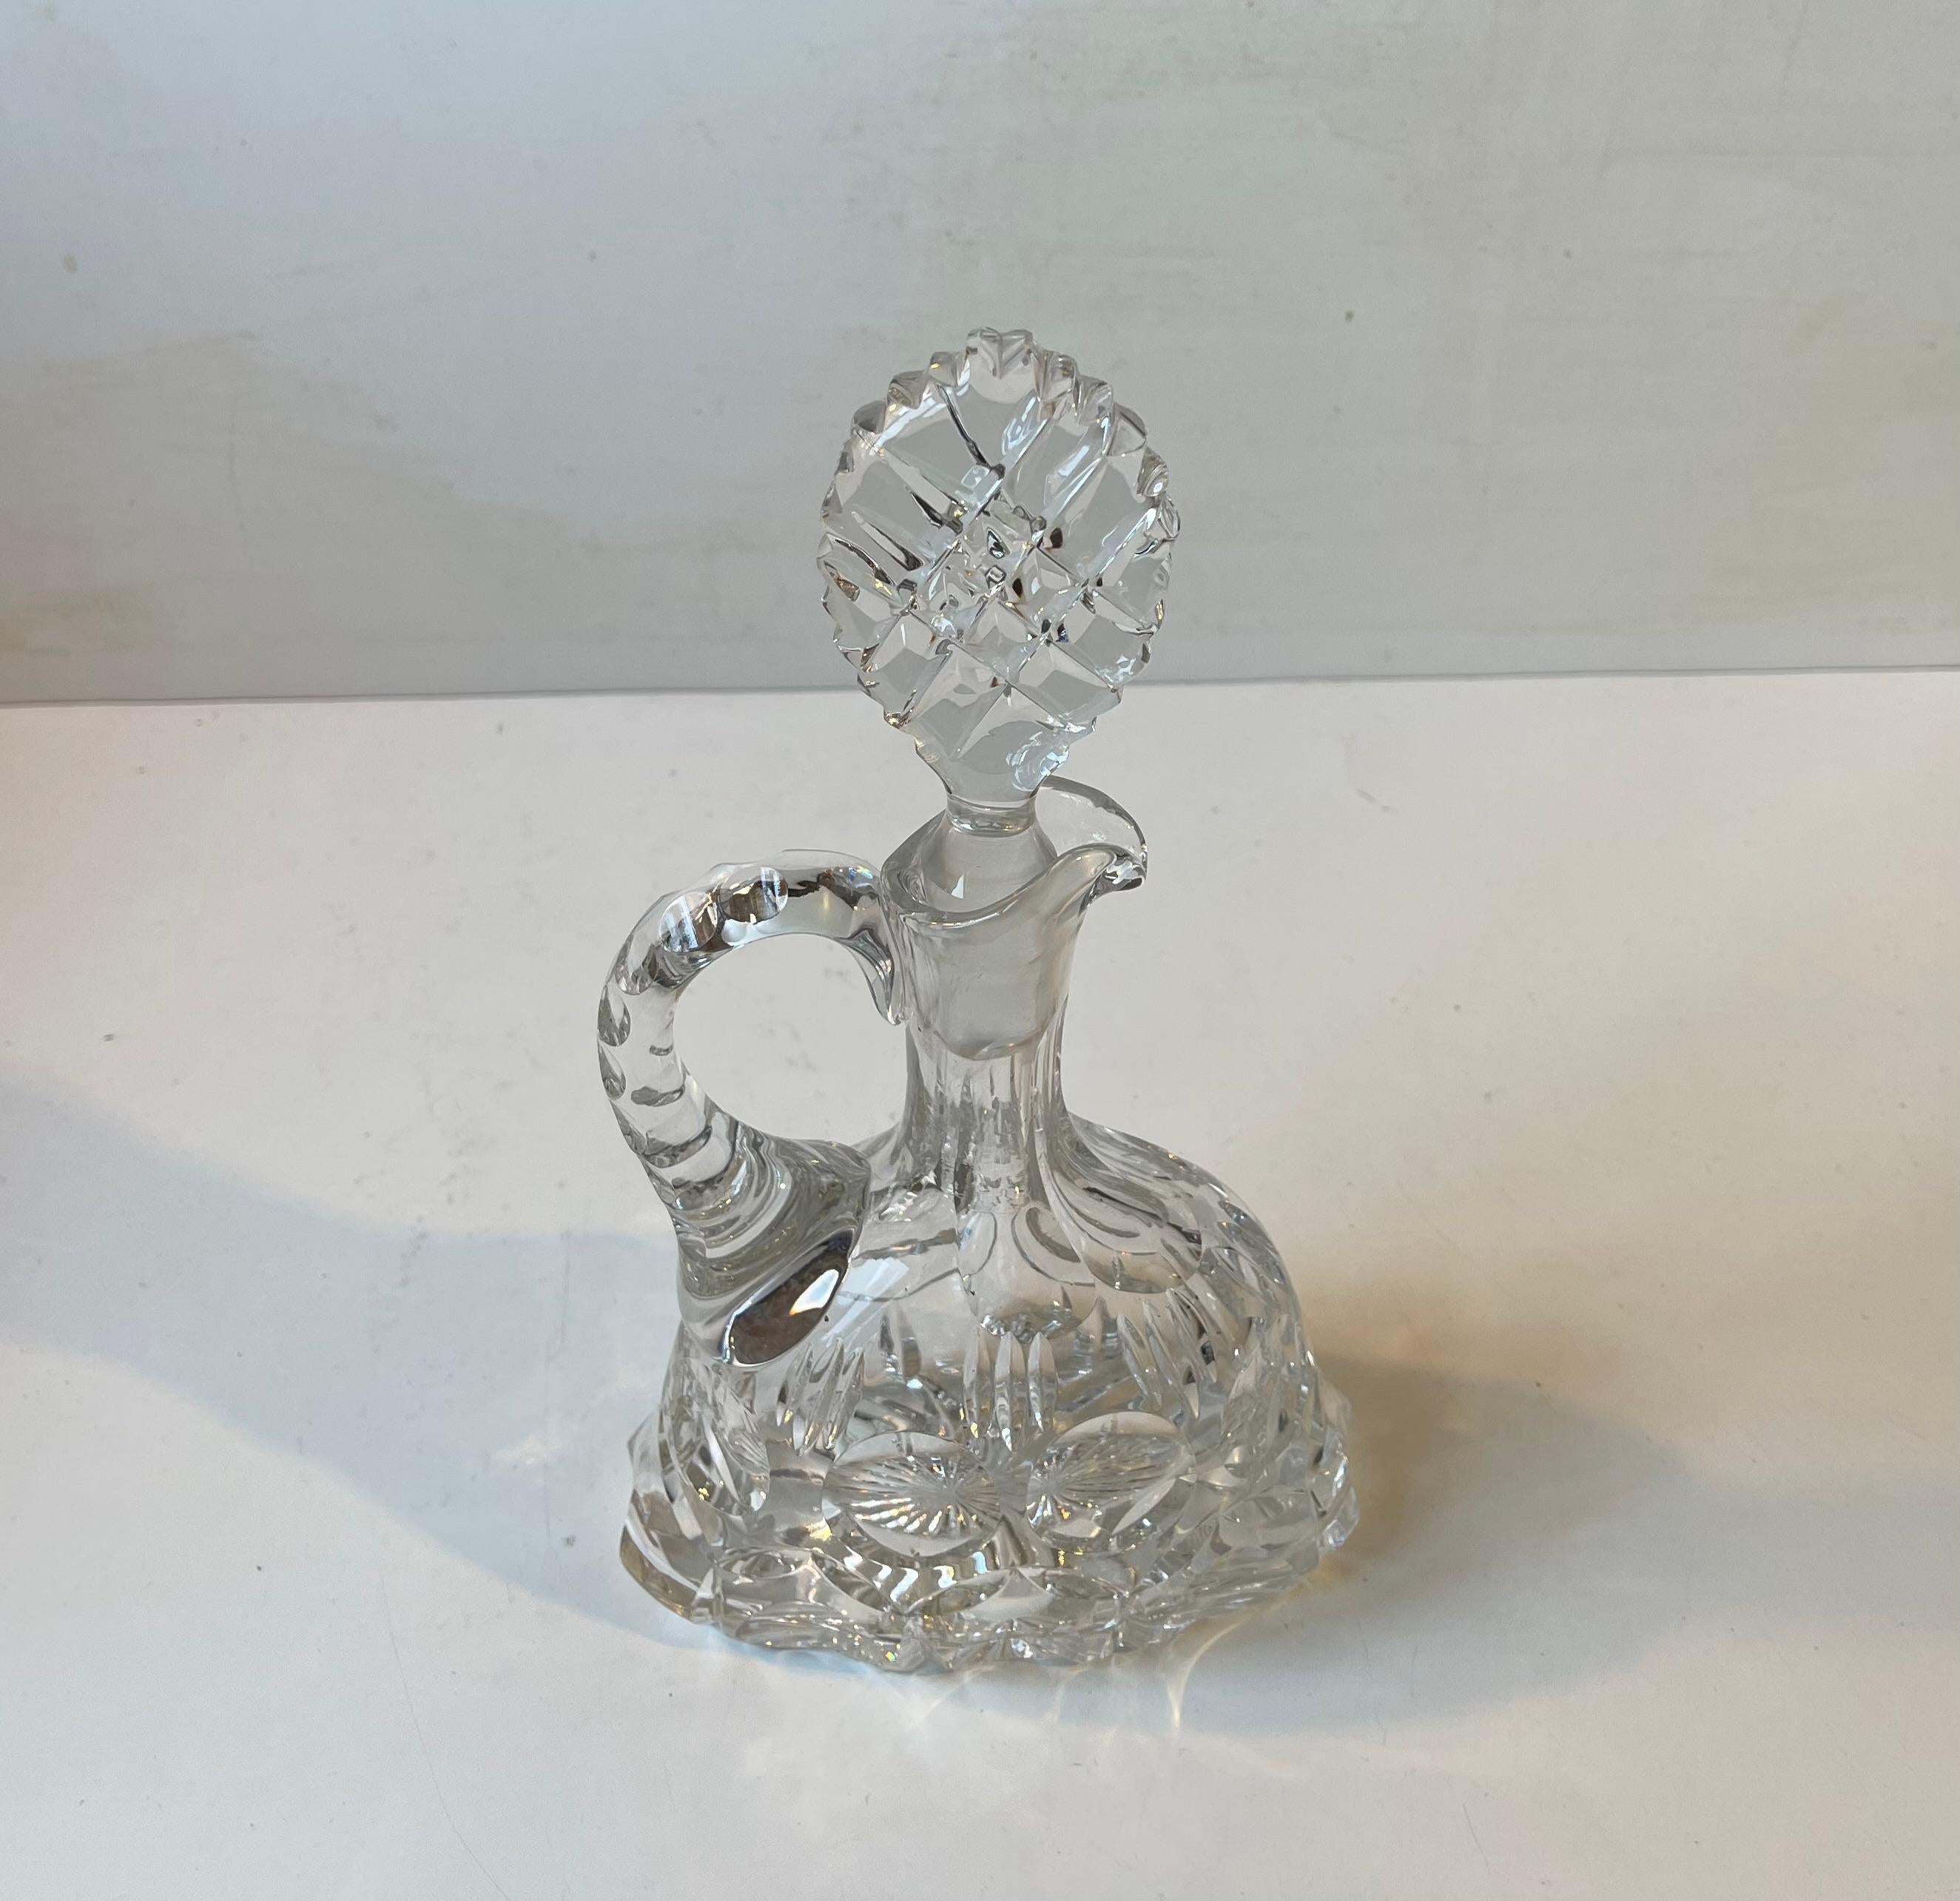 This wine or Port decanter dates to the 1950s or 60s. Its many cut edges are beveled softly. It can contain around 0.7 liter. Very reminiscent in style to similar designs from Saint-Louis - Tommy Glassware. It was possibly made by Cristal de